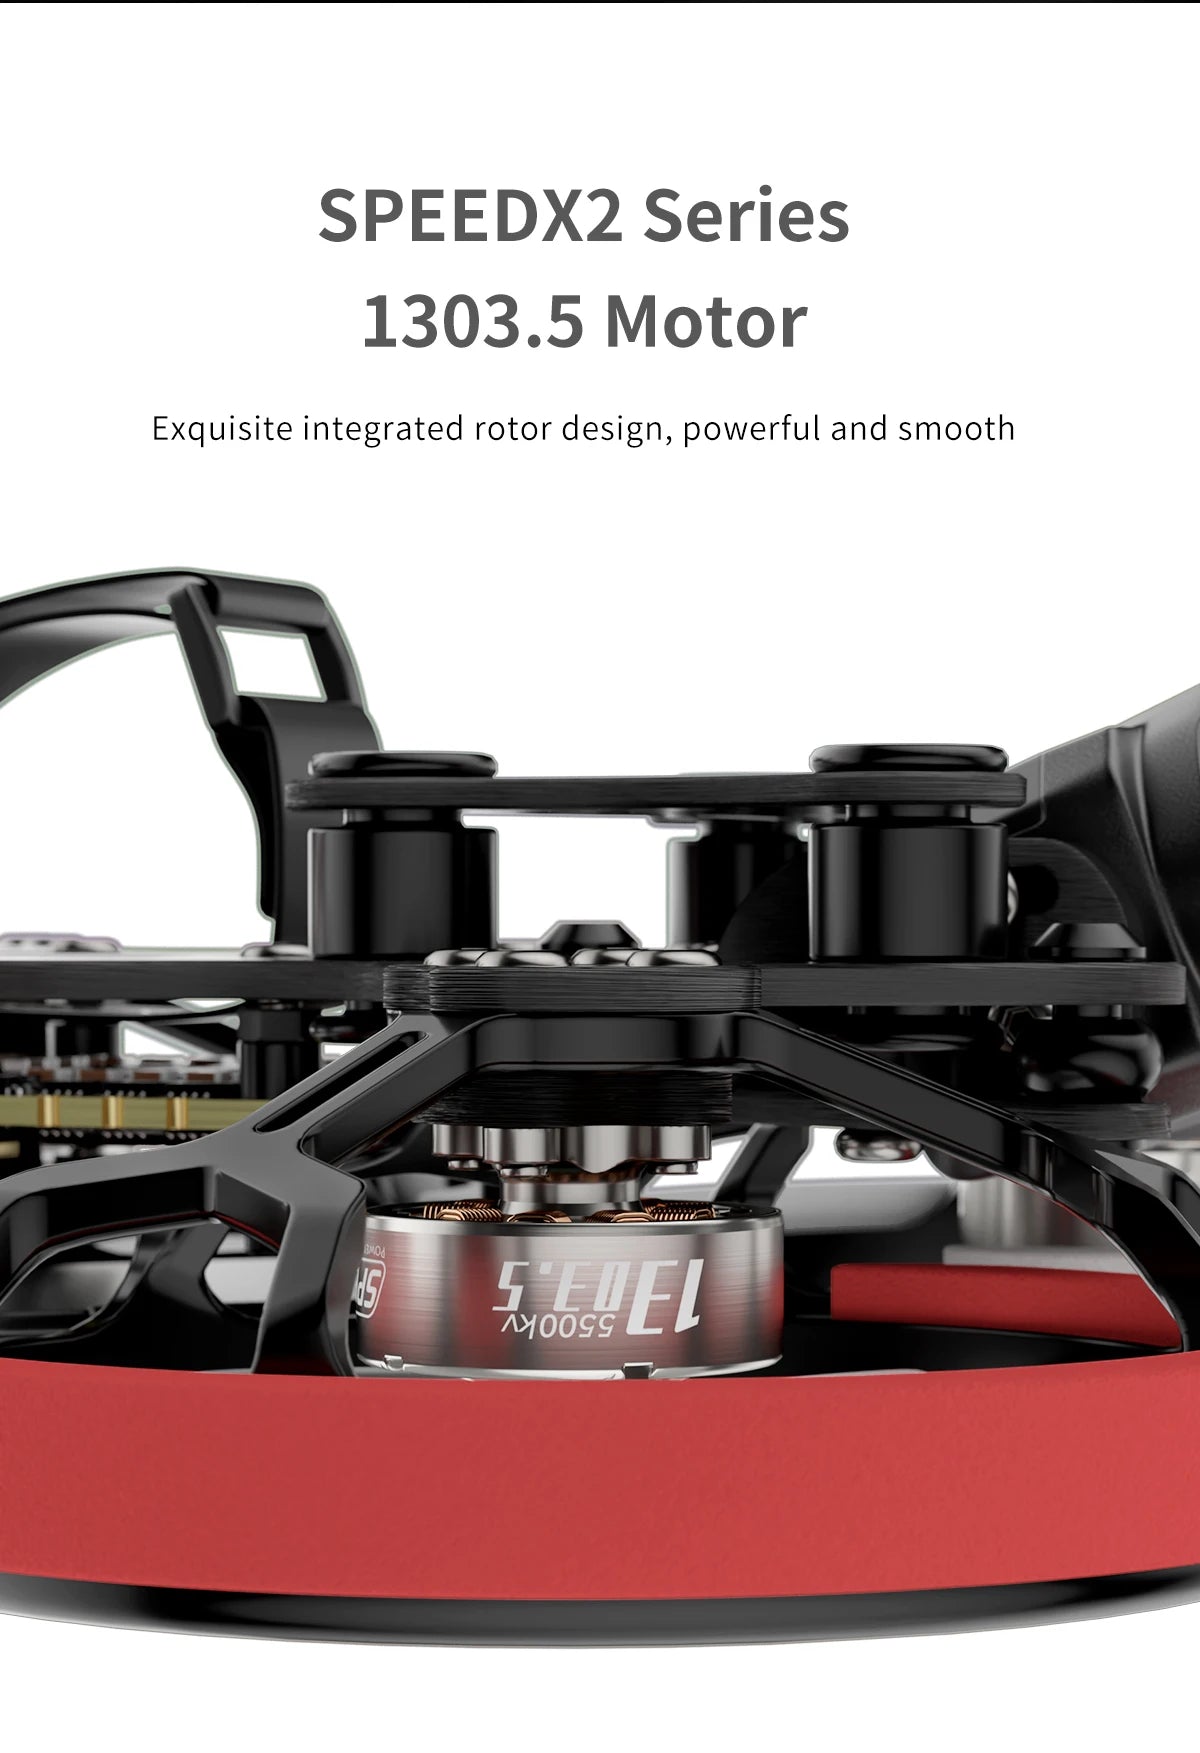 GEPRC Cinelog20 HD Wasp FPV Drone, SPEEDX2 Series 1303.5 Motor Exquisite integrated rotor design, powerful